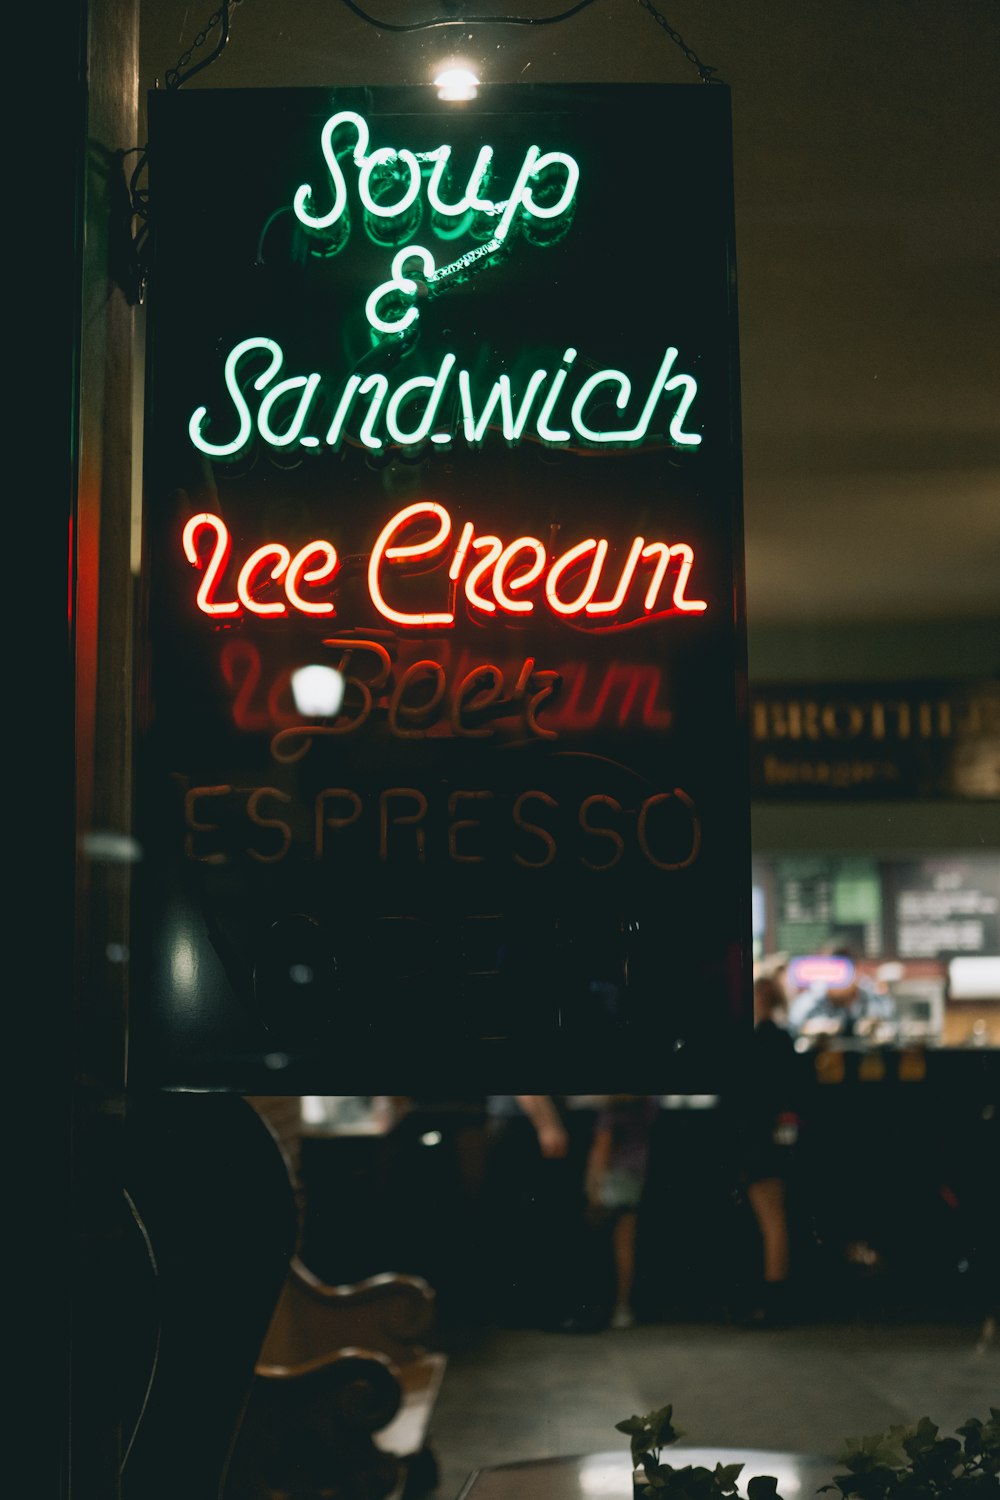 soup and sandwich ice cream LED lights during night time